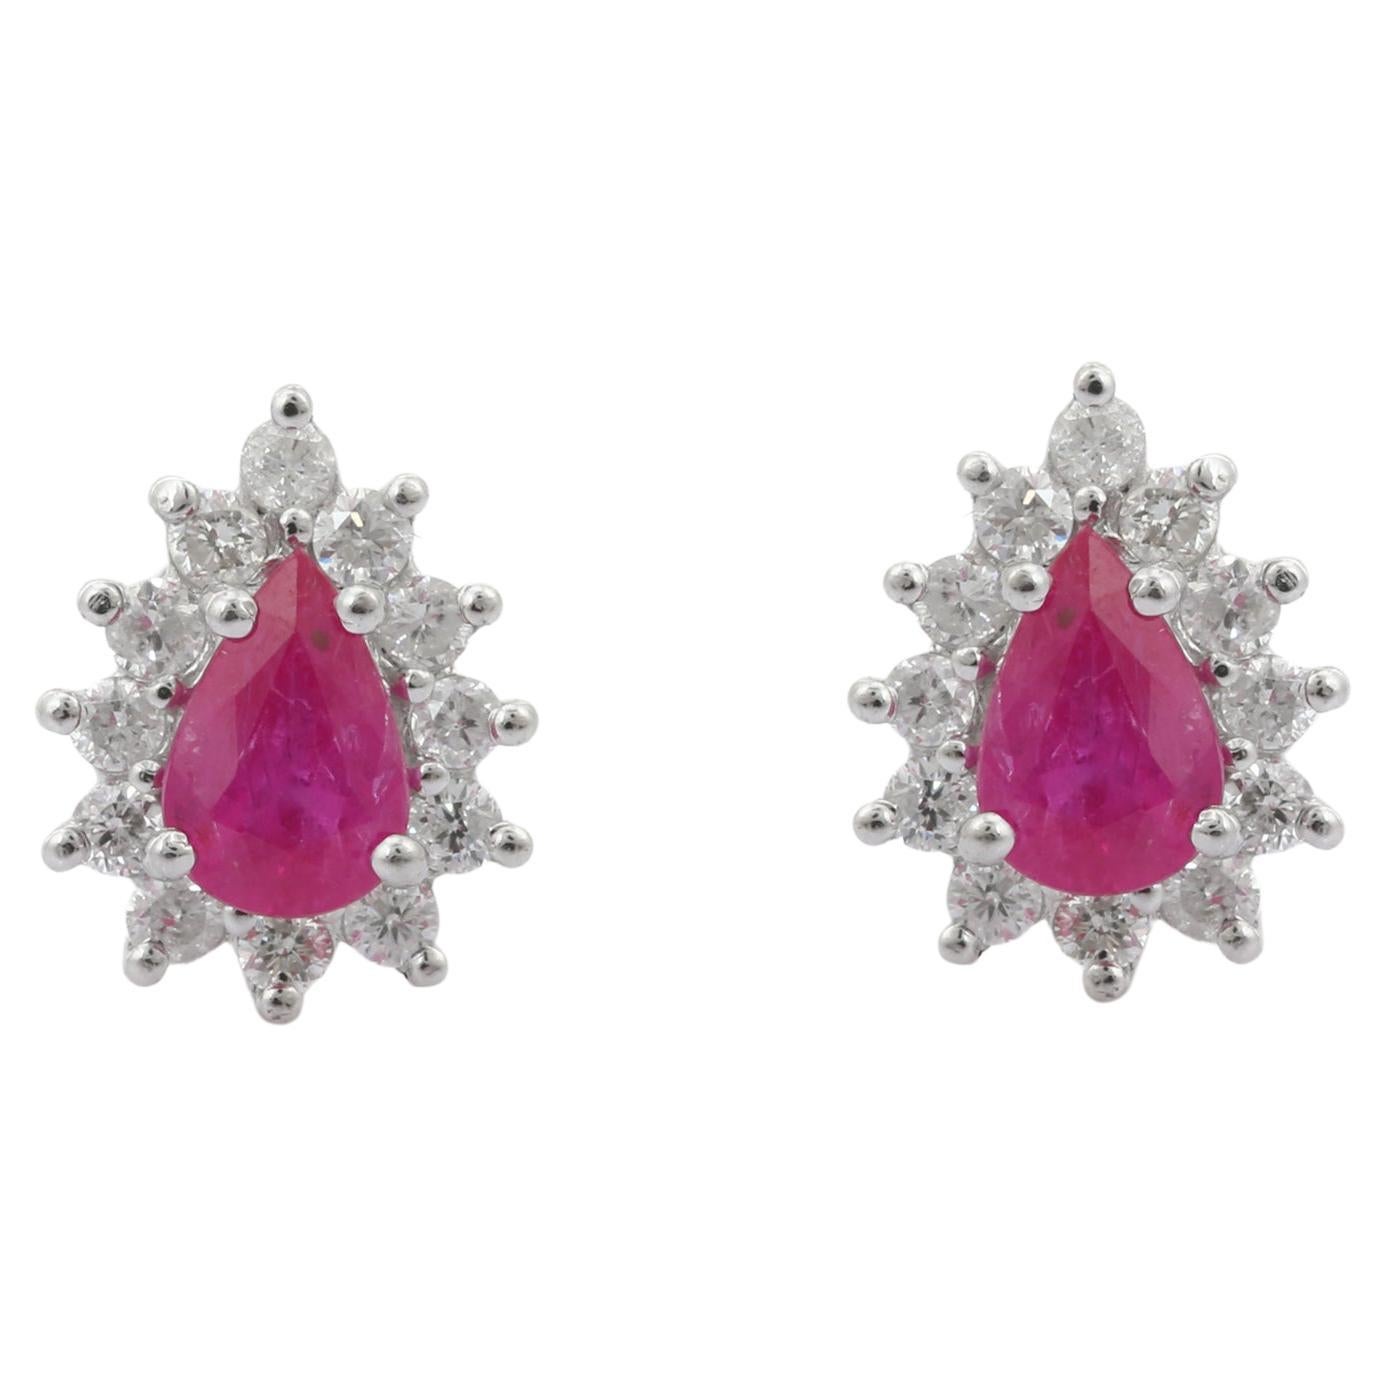 14K White Gold Fine Pear Cut 1.02 ct Ruby Stud Earrings with Halo of Diamonds